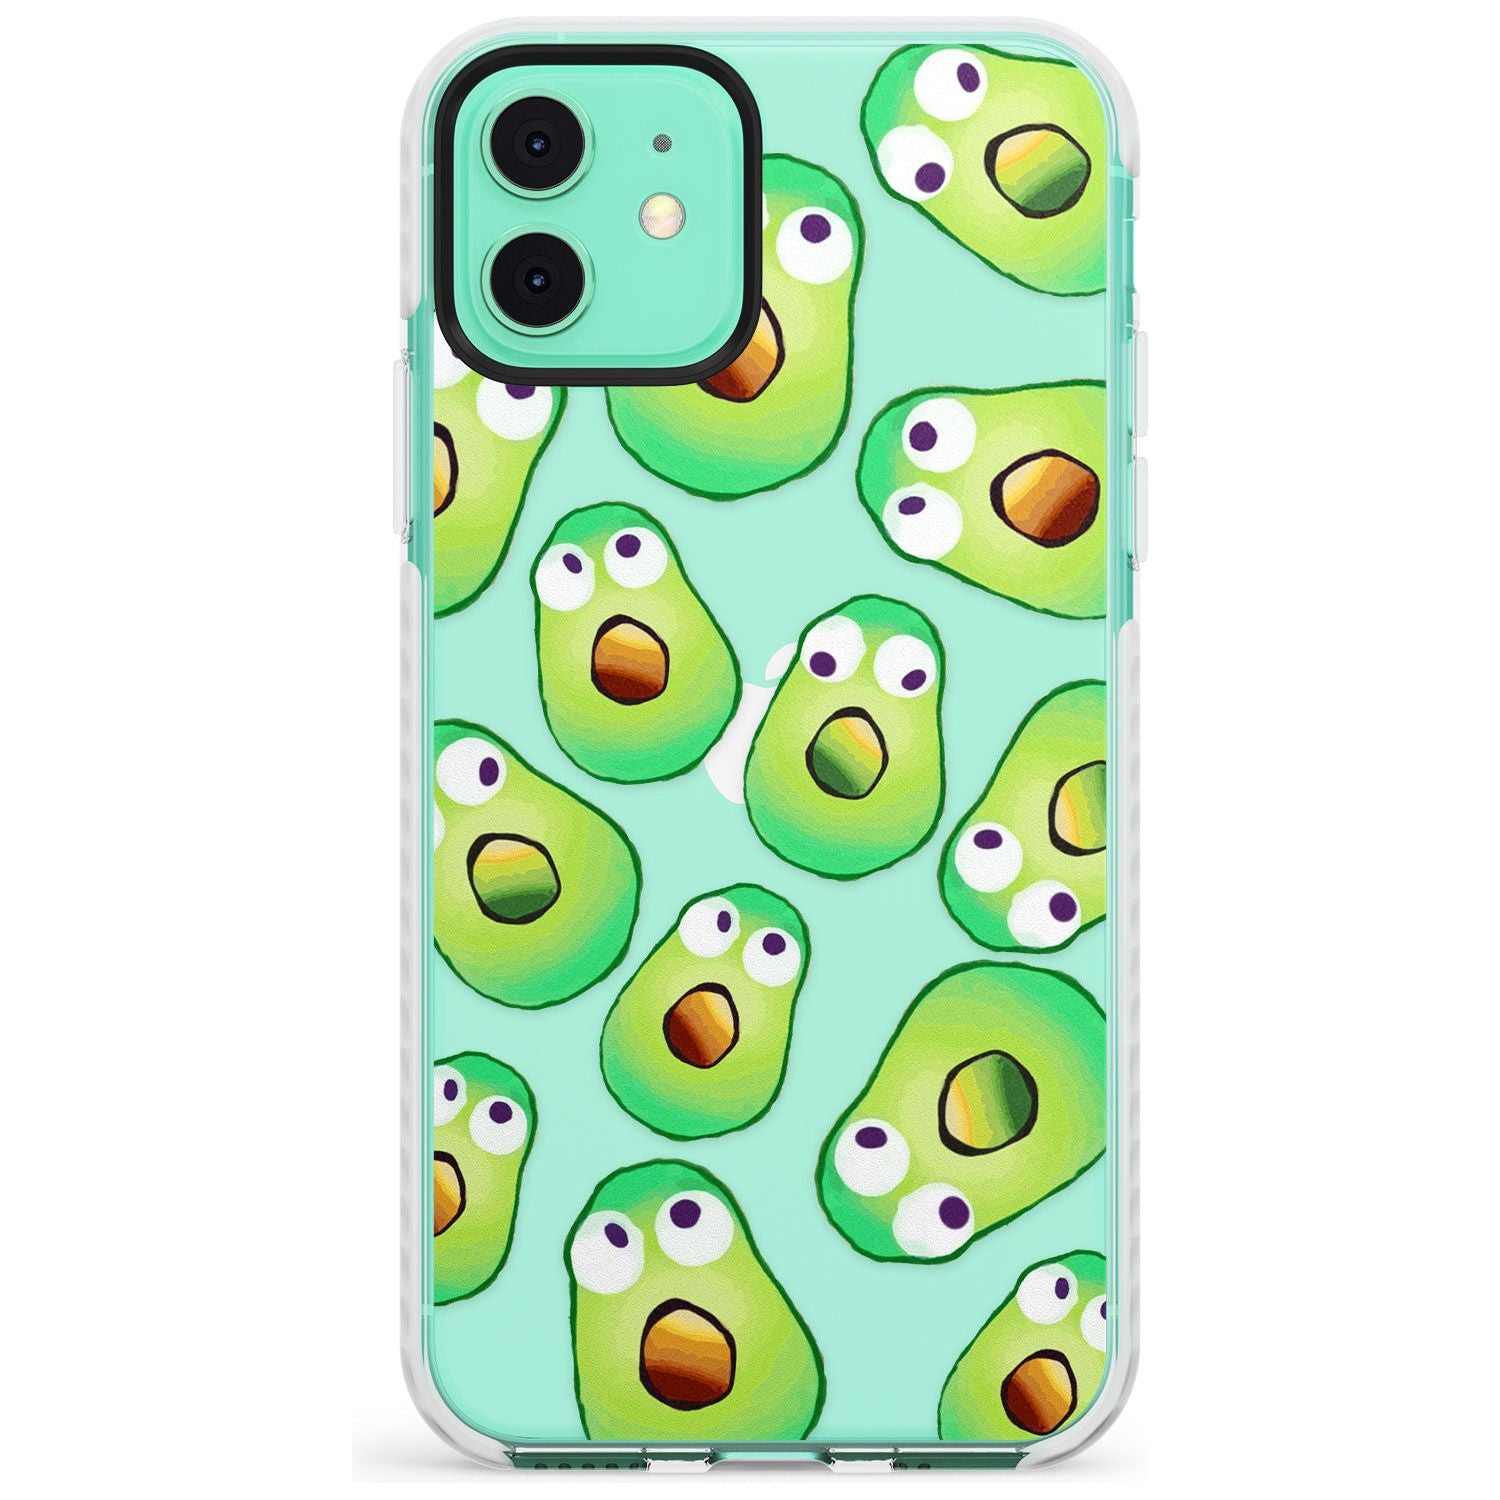 Shocked Avocados Impact Phone Case for iPhone 11